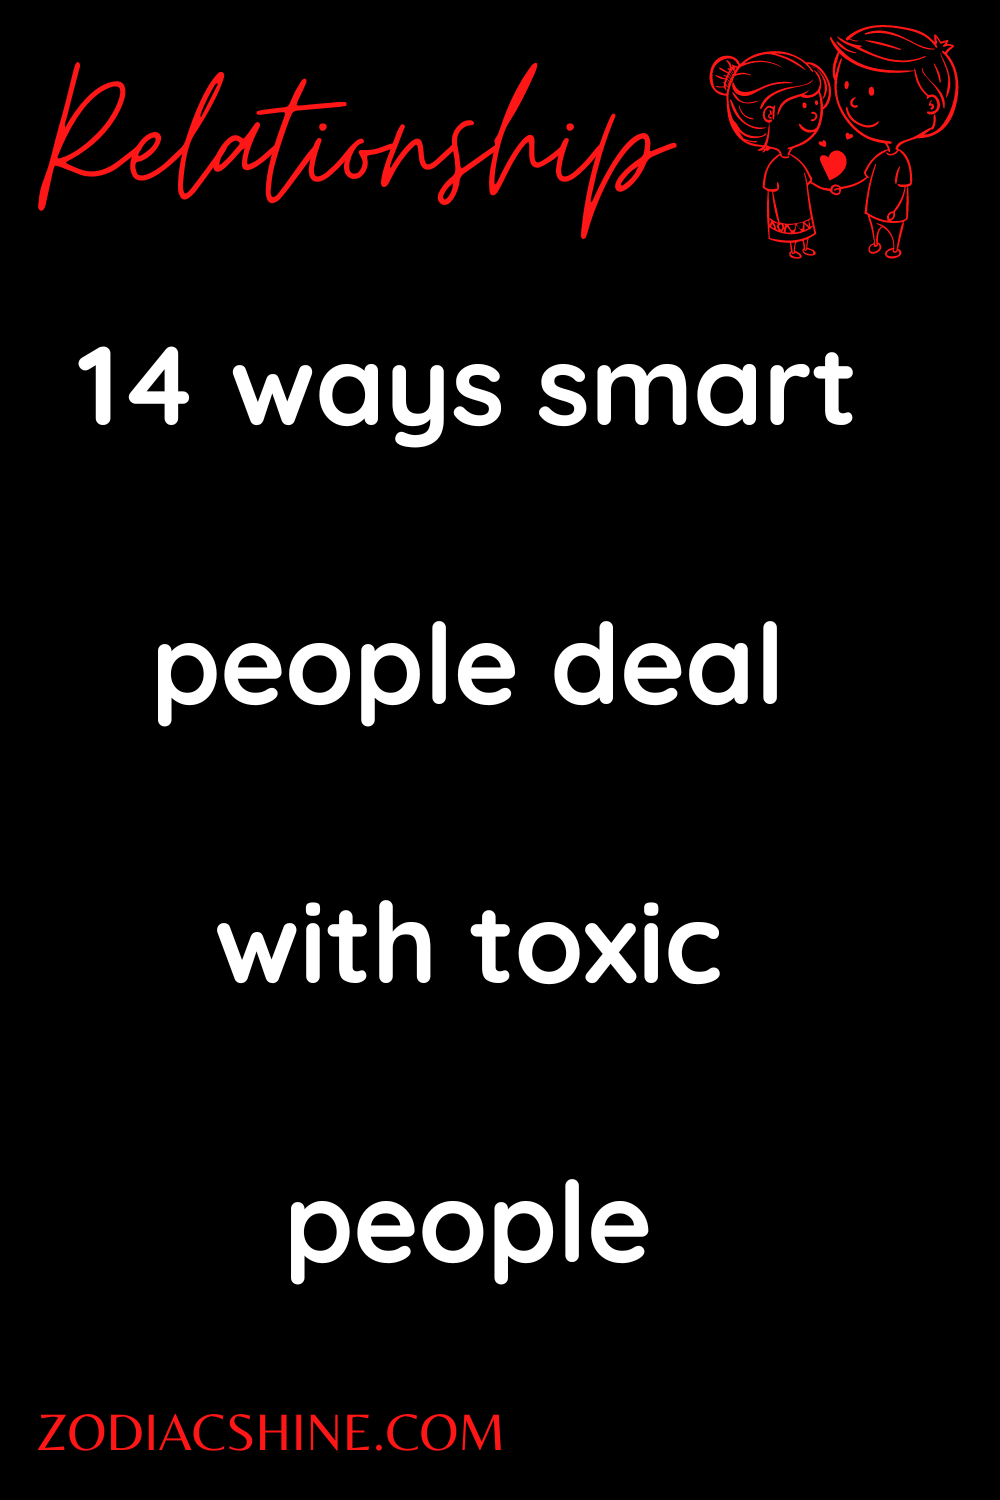 14 ways smart people deal with toxic people